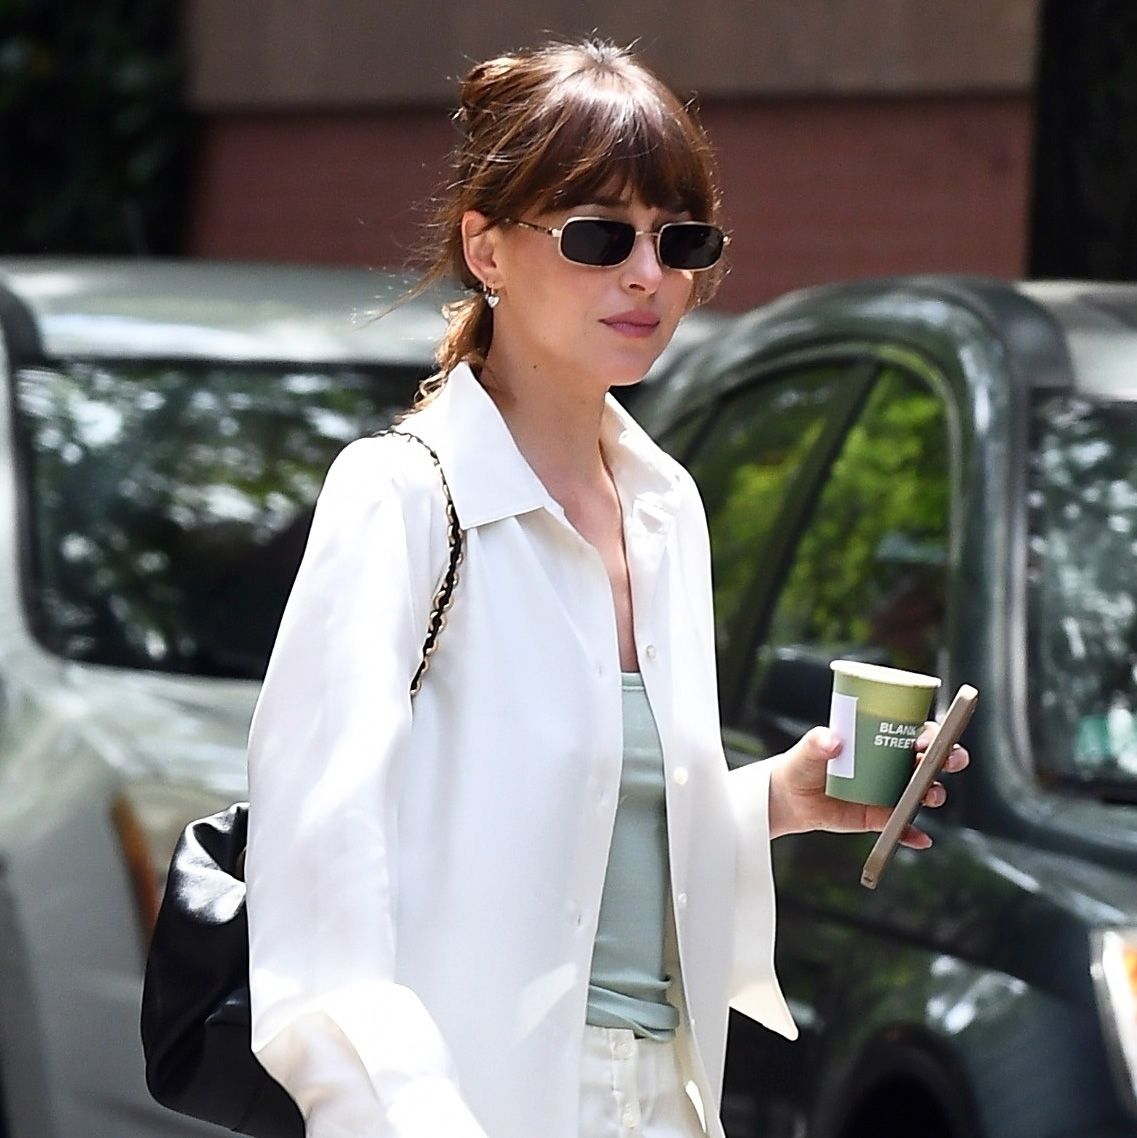 Dakota Johnson Wore the Un-Trendy Shoe Trend Everyone Is Wearing With Skirts